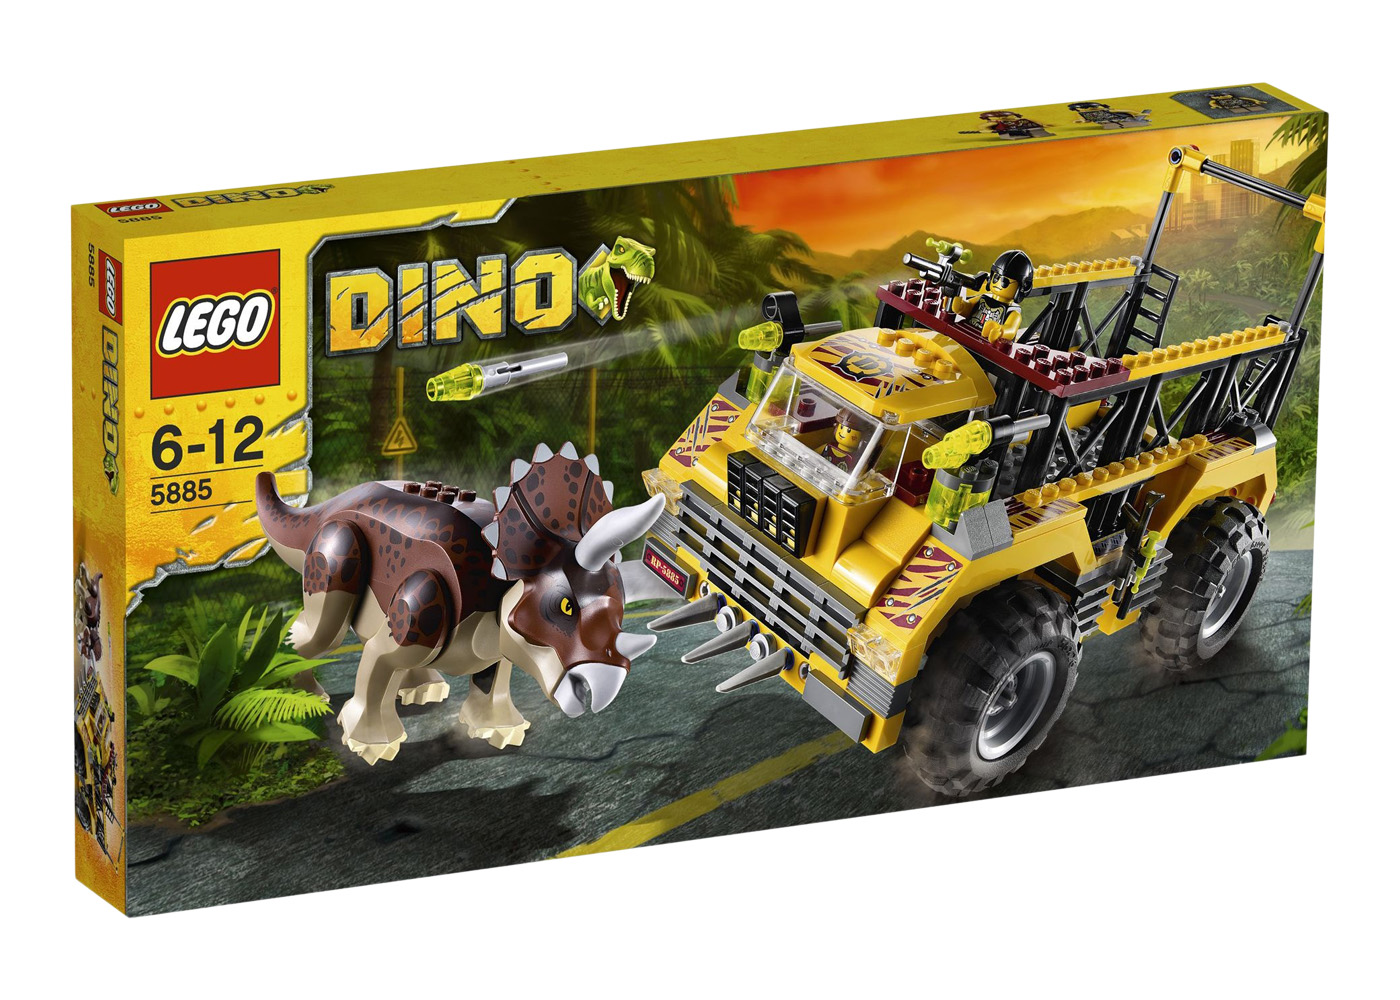 LEGO Dino Triceratops Trapper Set 5885 - FW11 - US